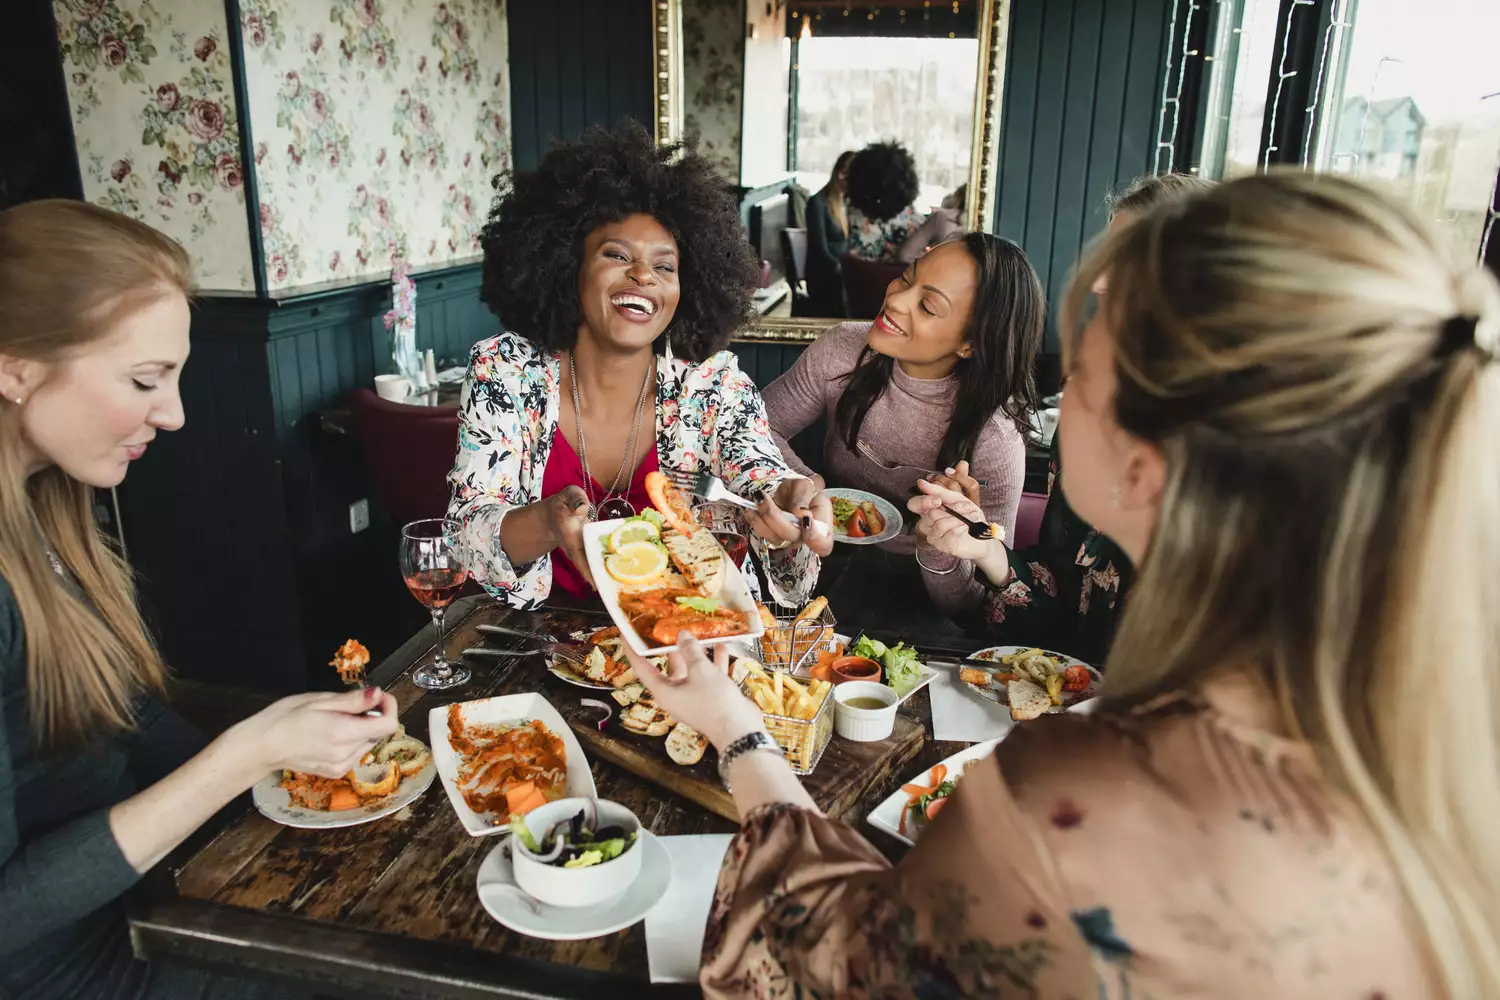 Group of women eating lunch